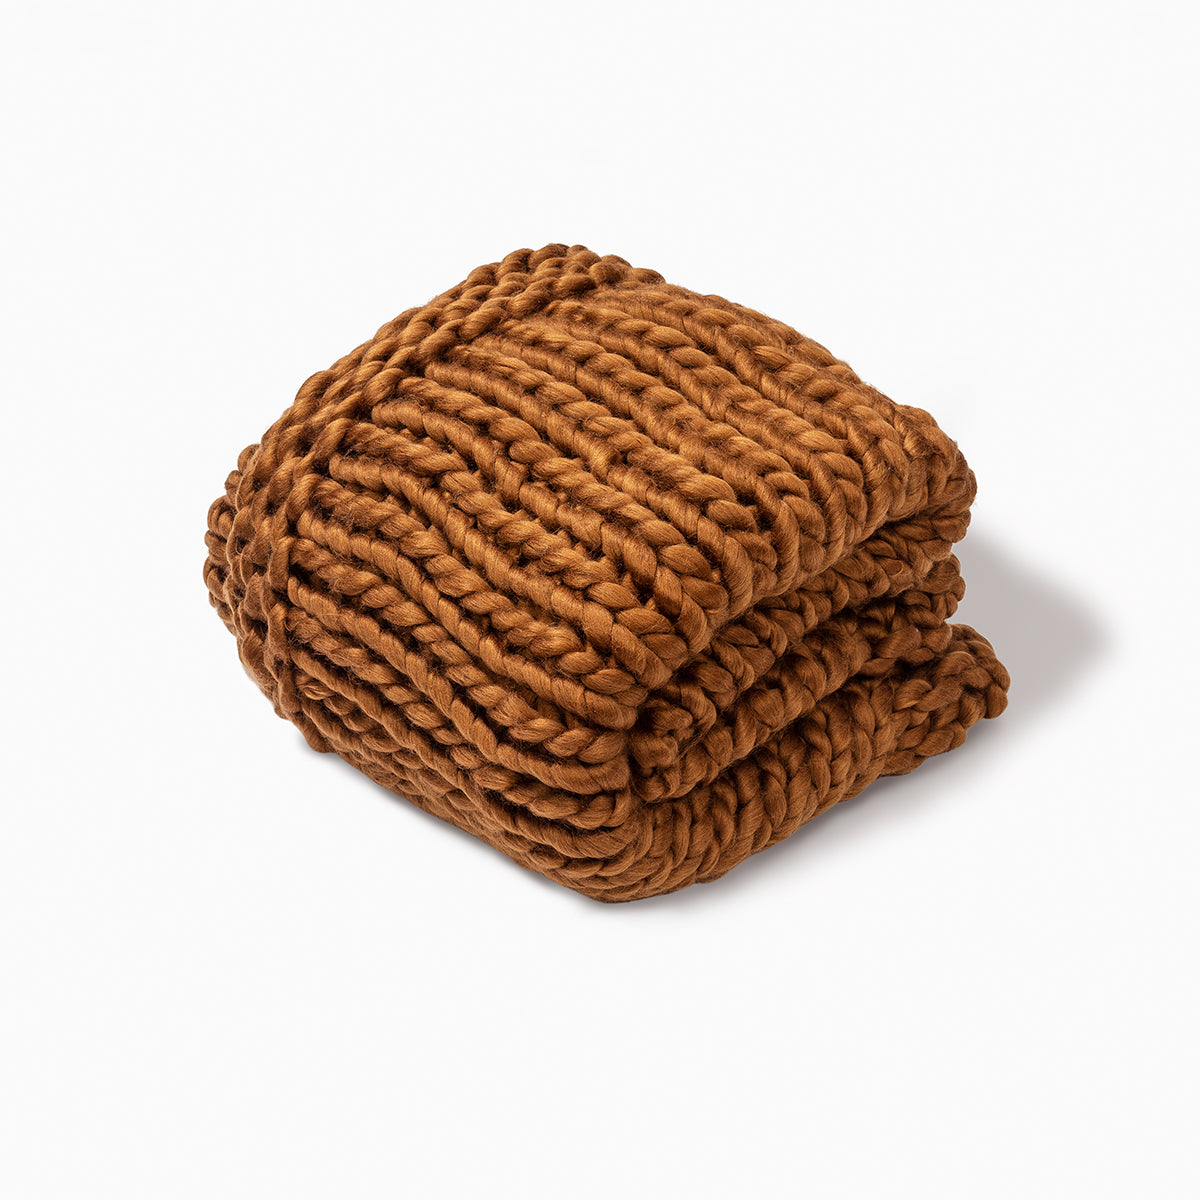 Chunky Knit Throw | Product Image | Uncommon James Home